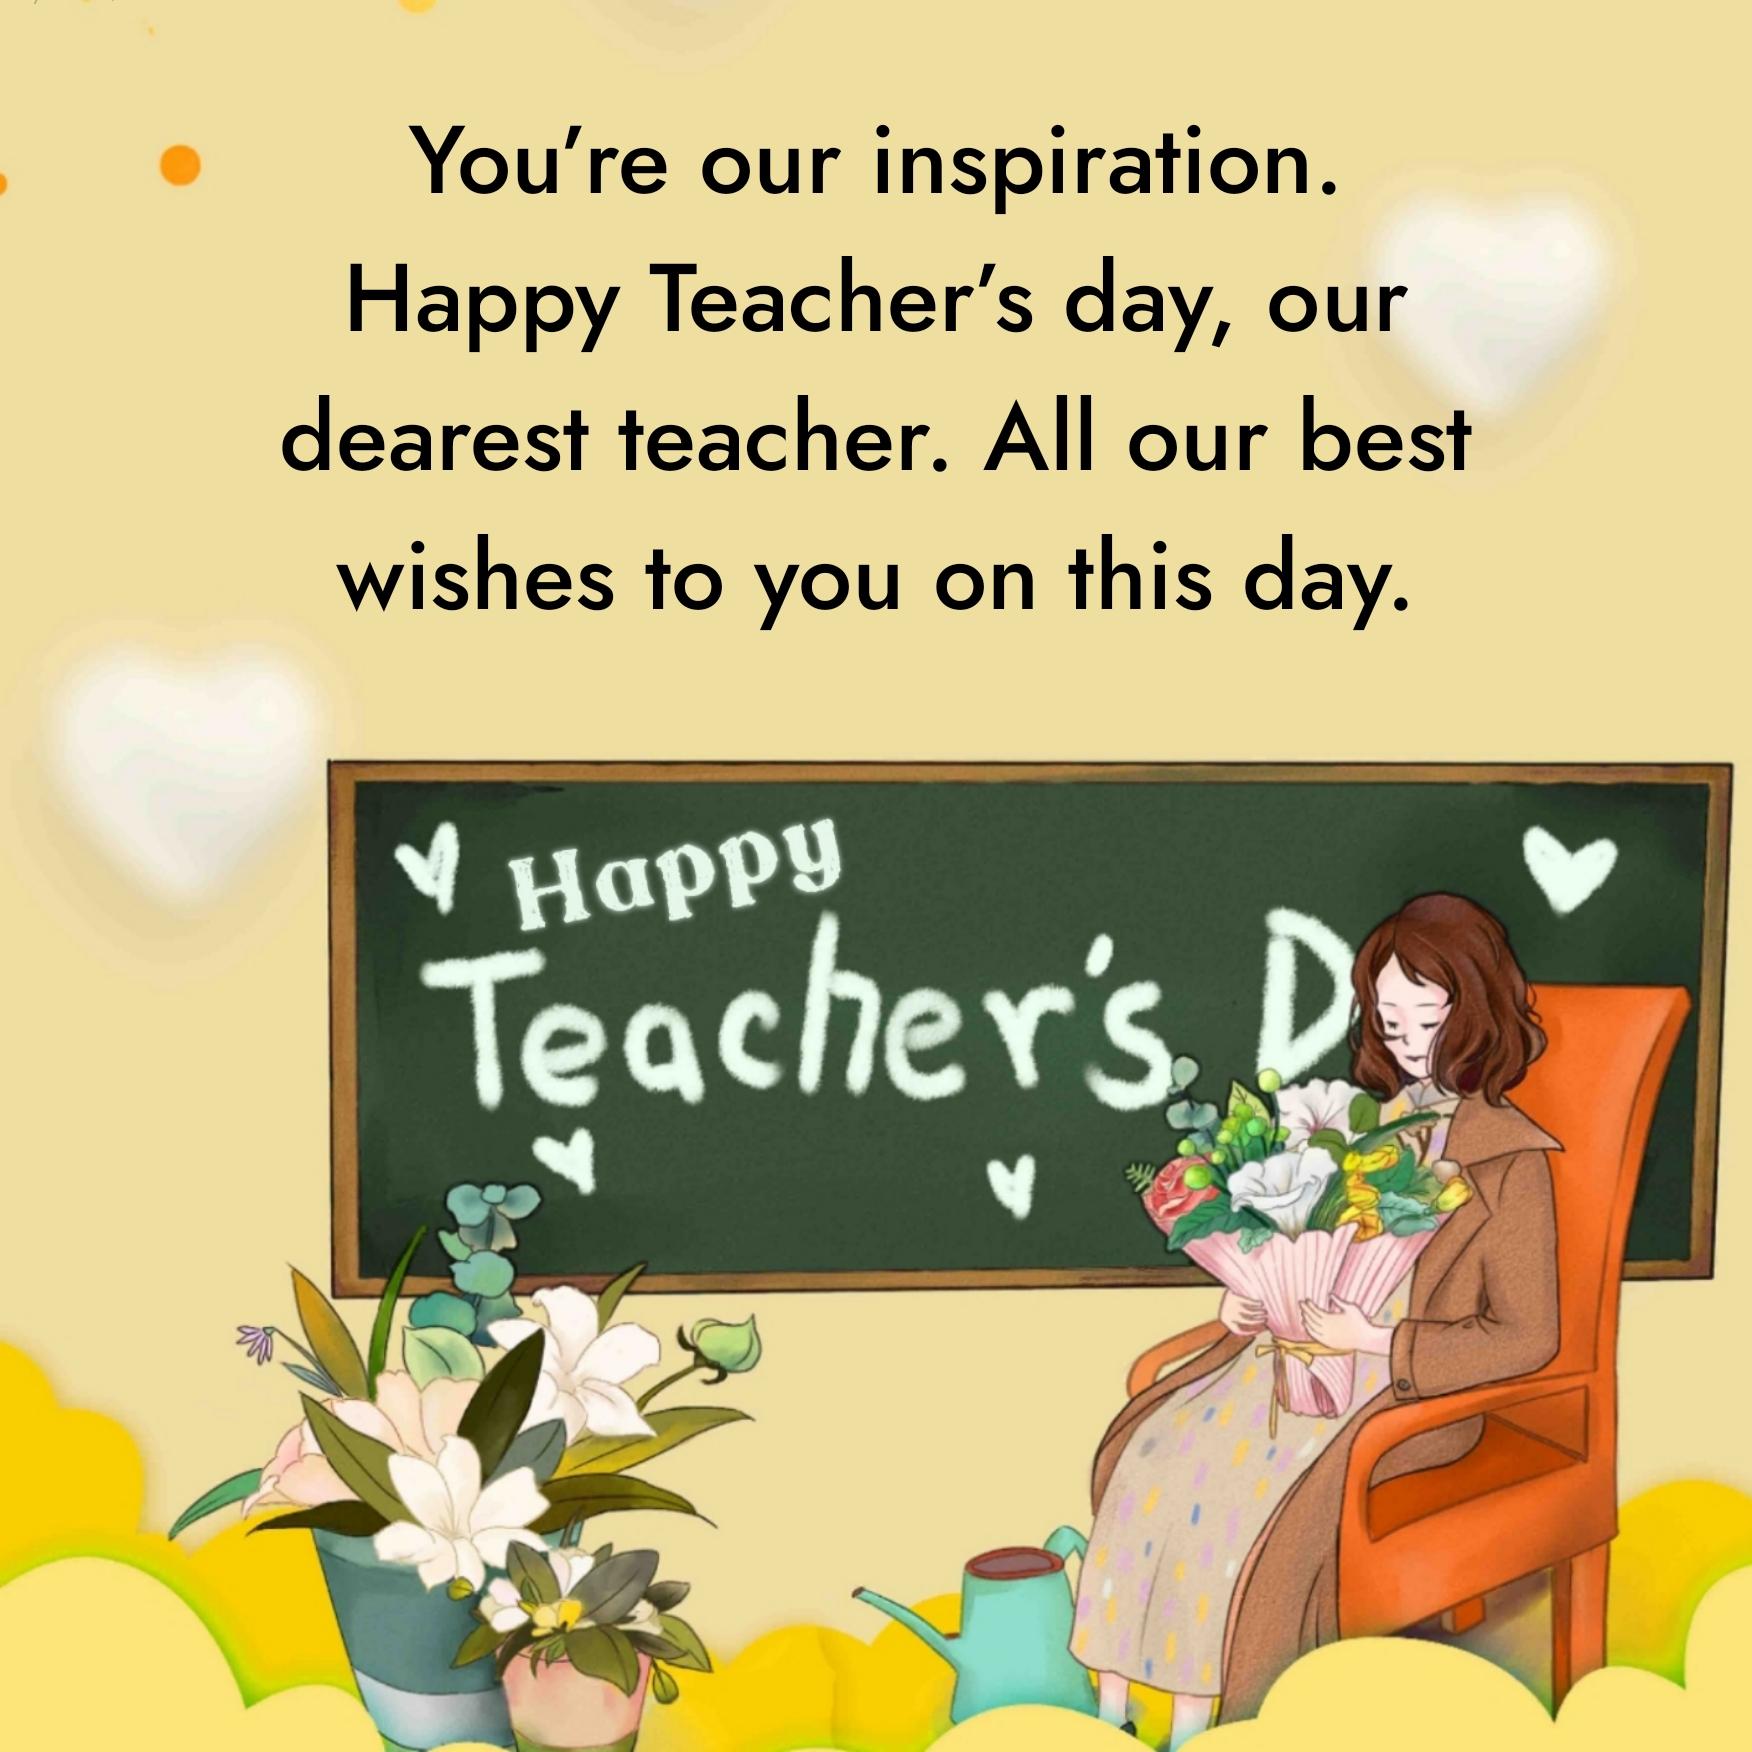 You’re our inspiration. Happy Teacher’s day